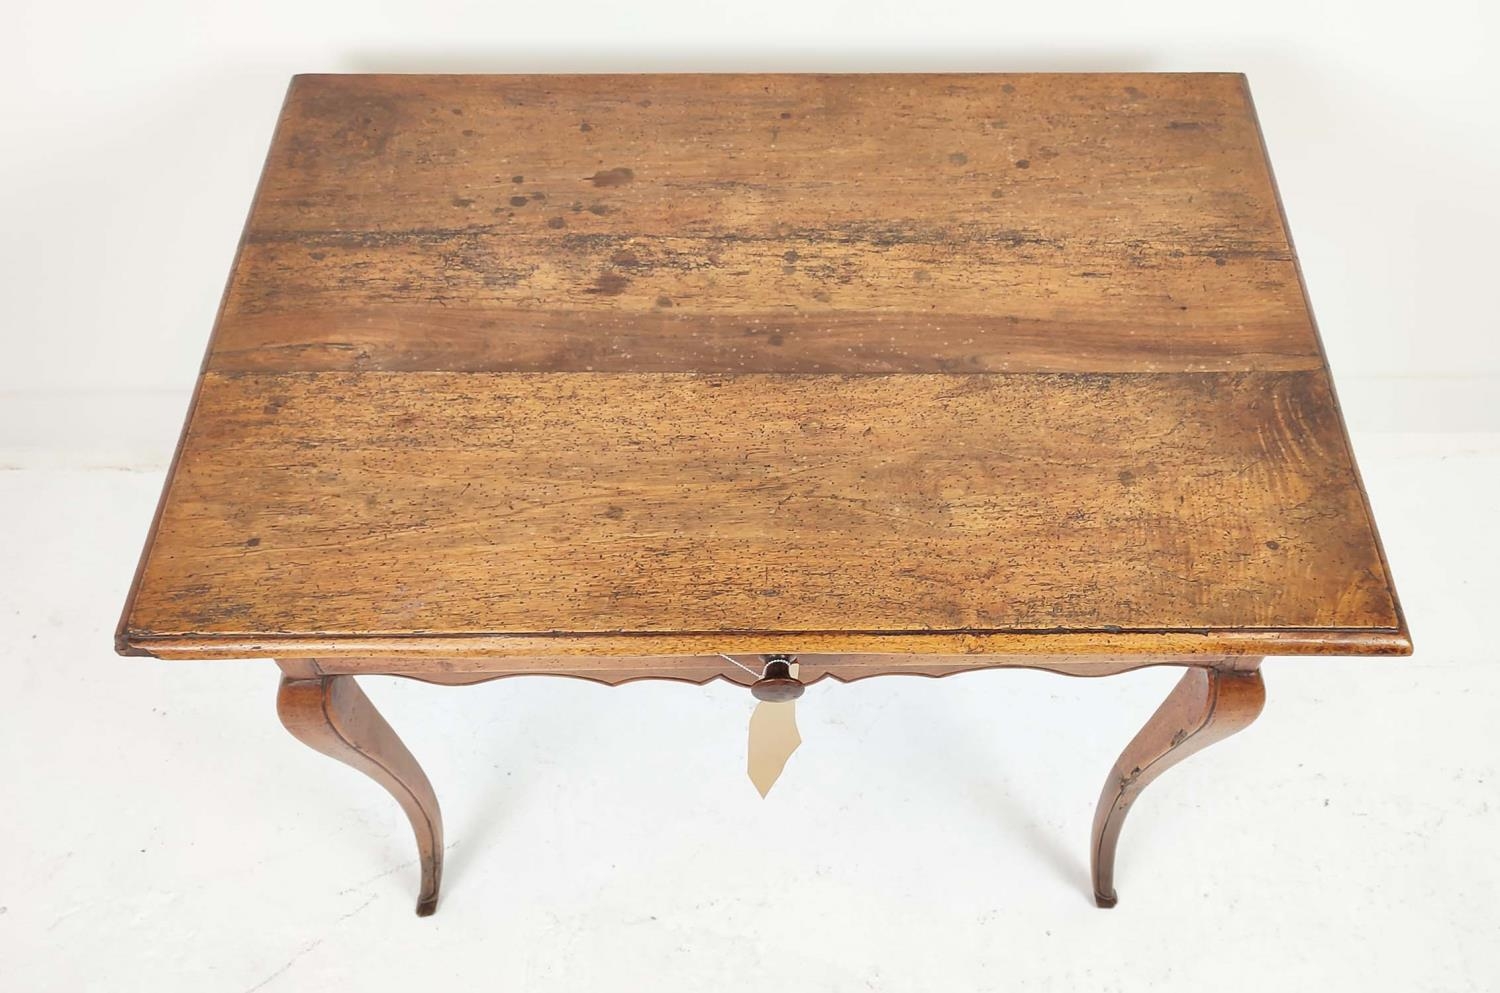 SIDE TABLE, late 18th/early 19th century French provincial walnut with single drawer, 97cm L x - Image 6 of 9